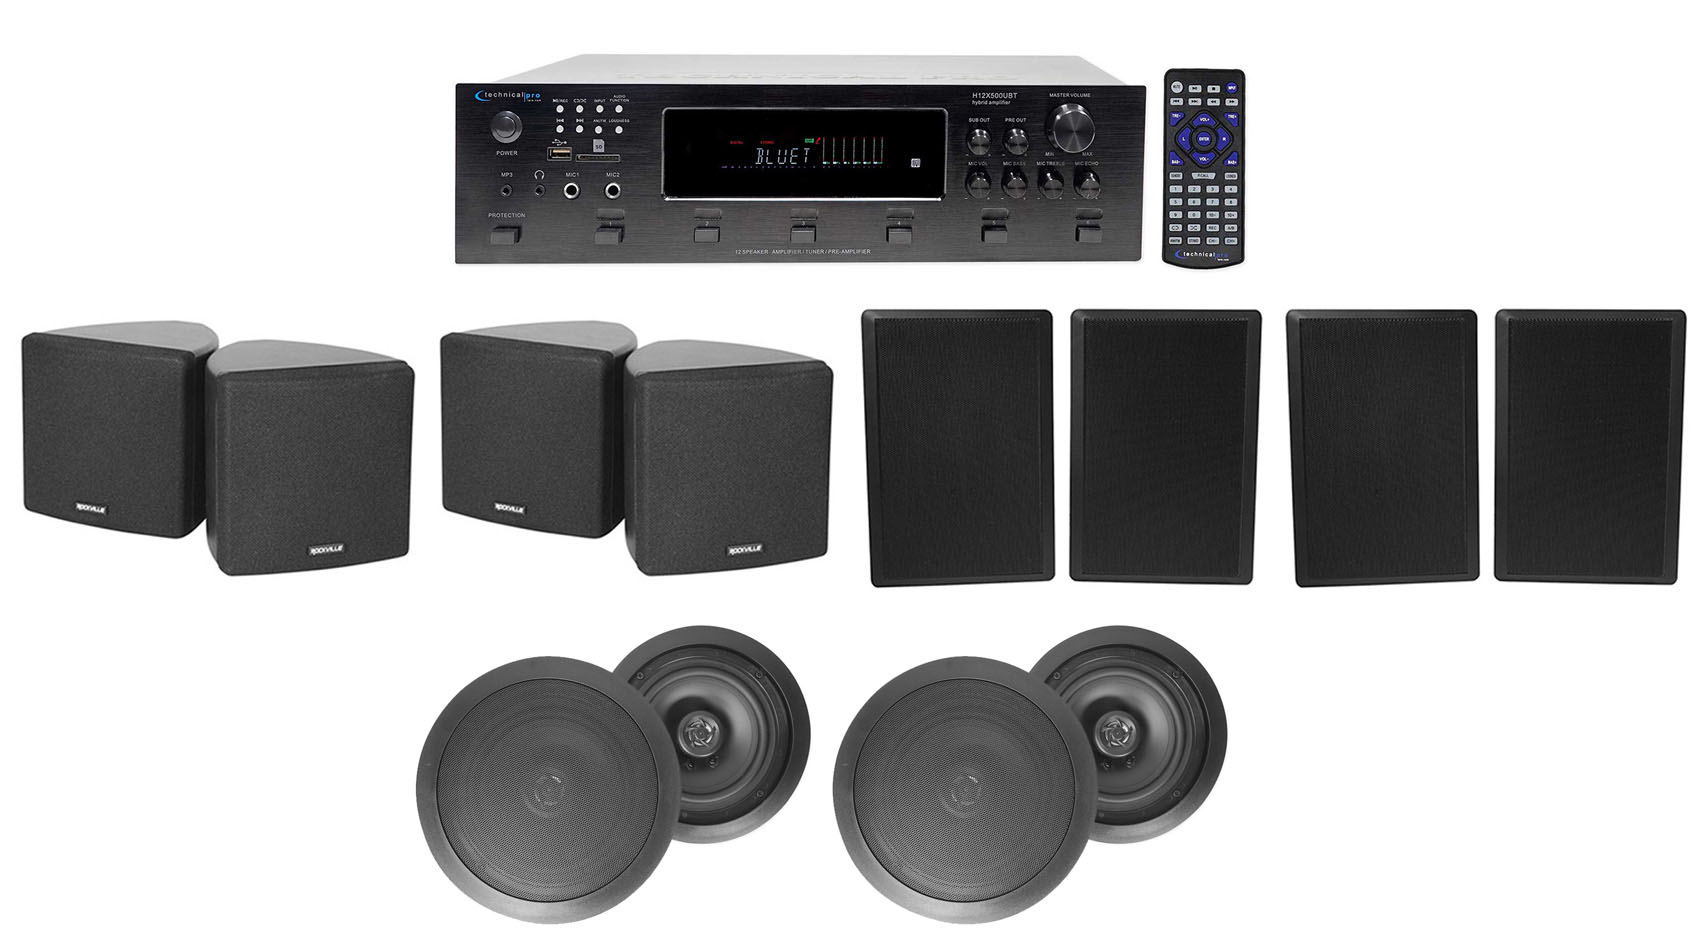 H12X500UBT 6-Zone Home Theater Receiver+Cube+Wall+Black Ceiling Speakers - image 1 of 11